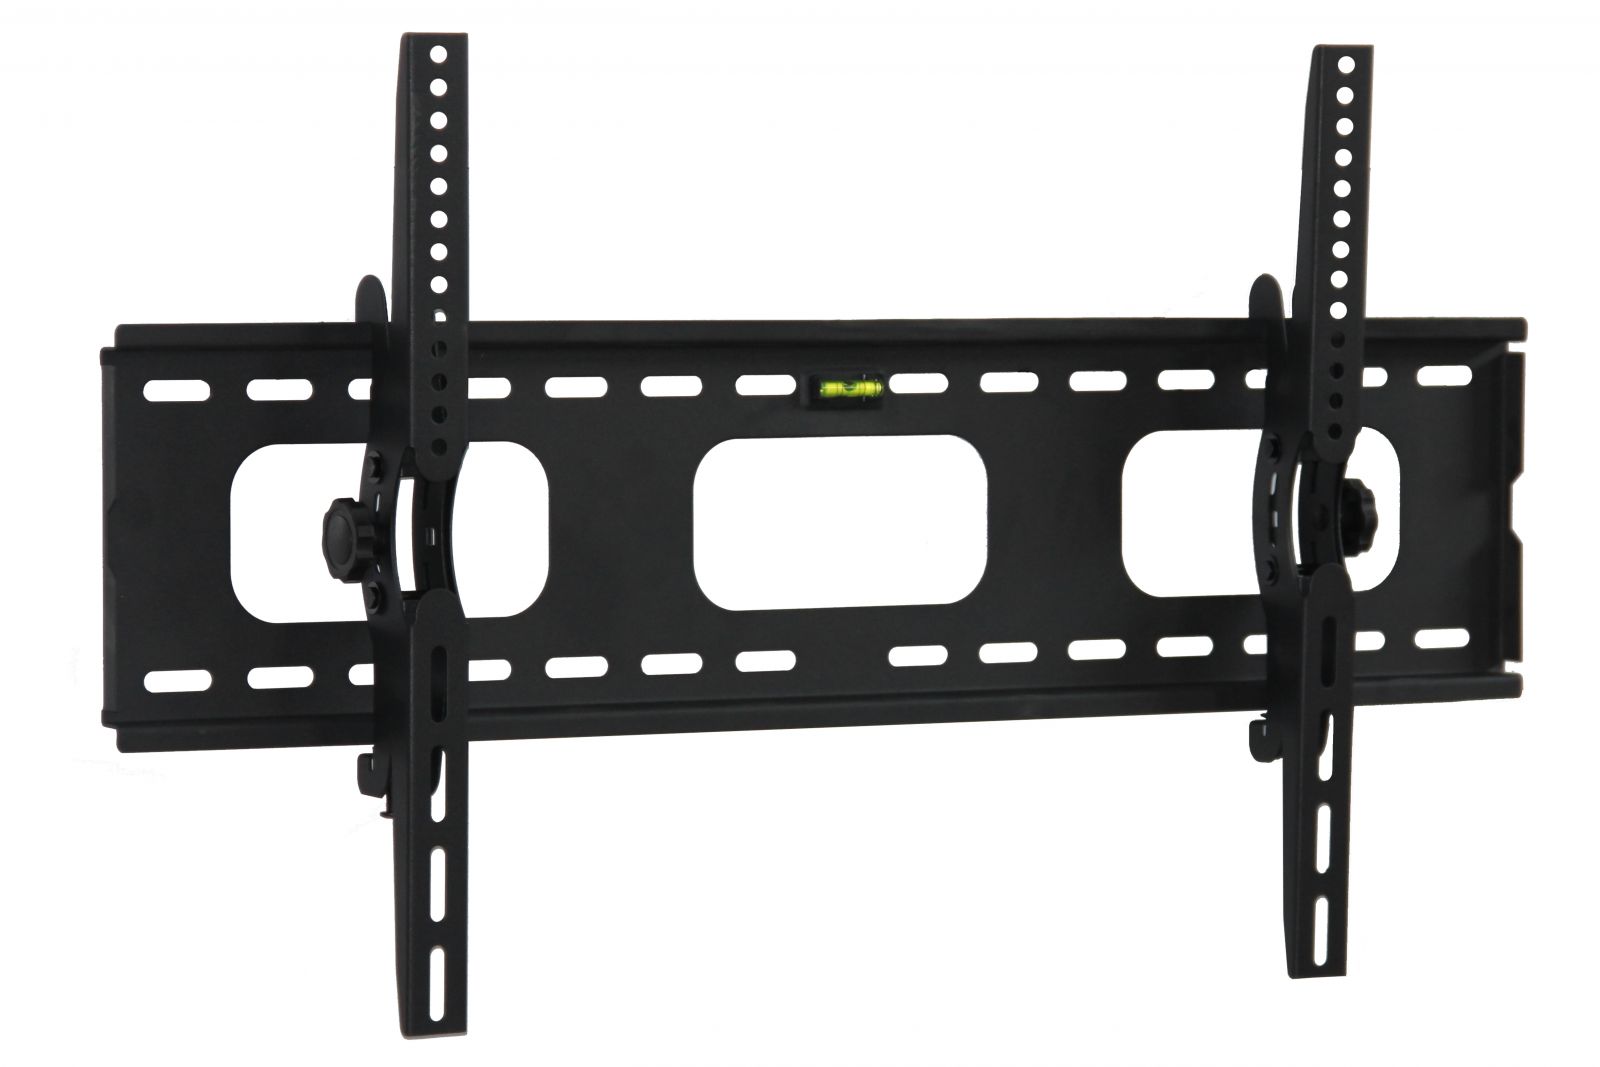 An adjustable wall bracket for TVs with 15 degrees of tilt